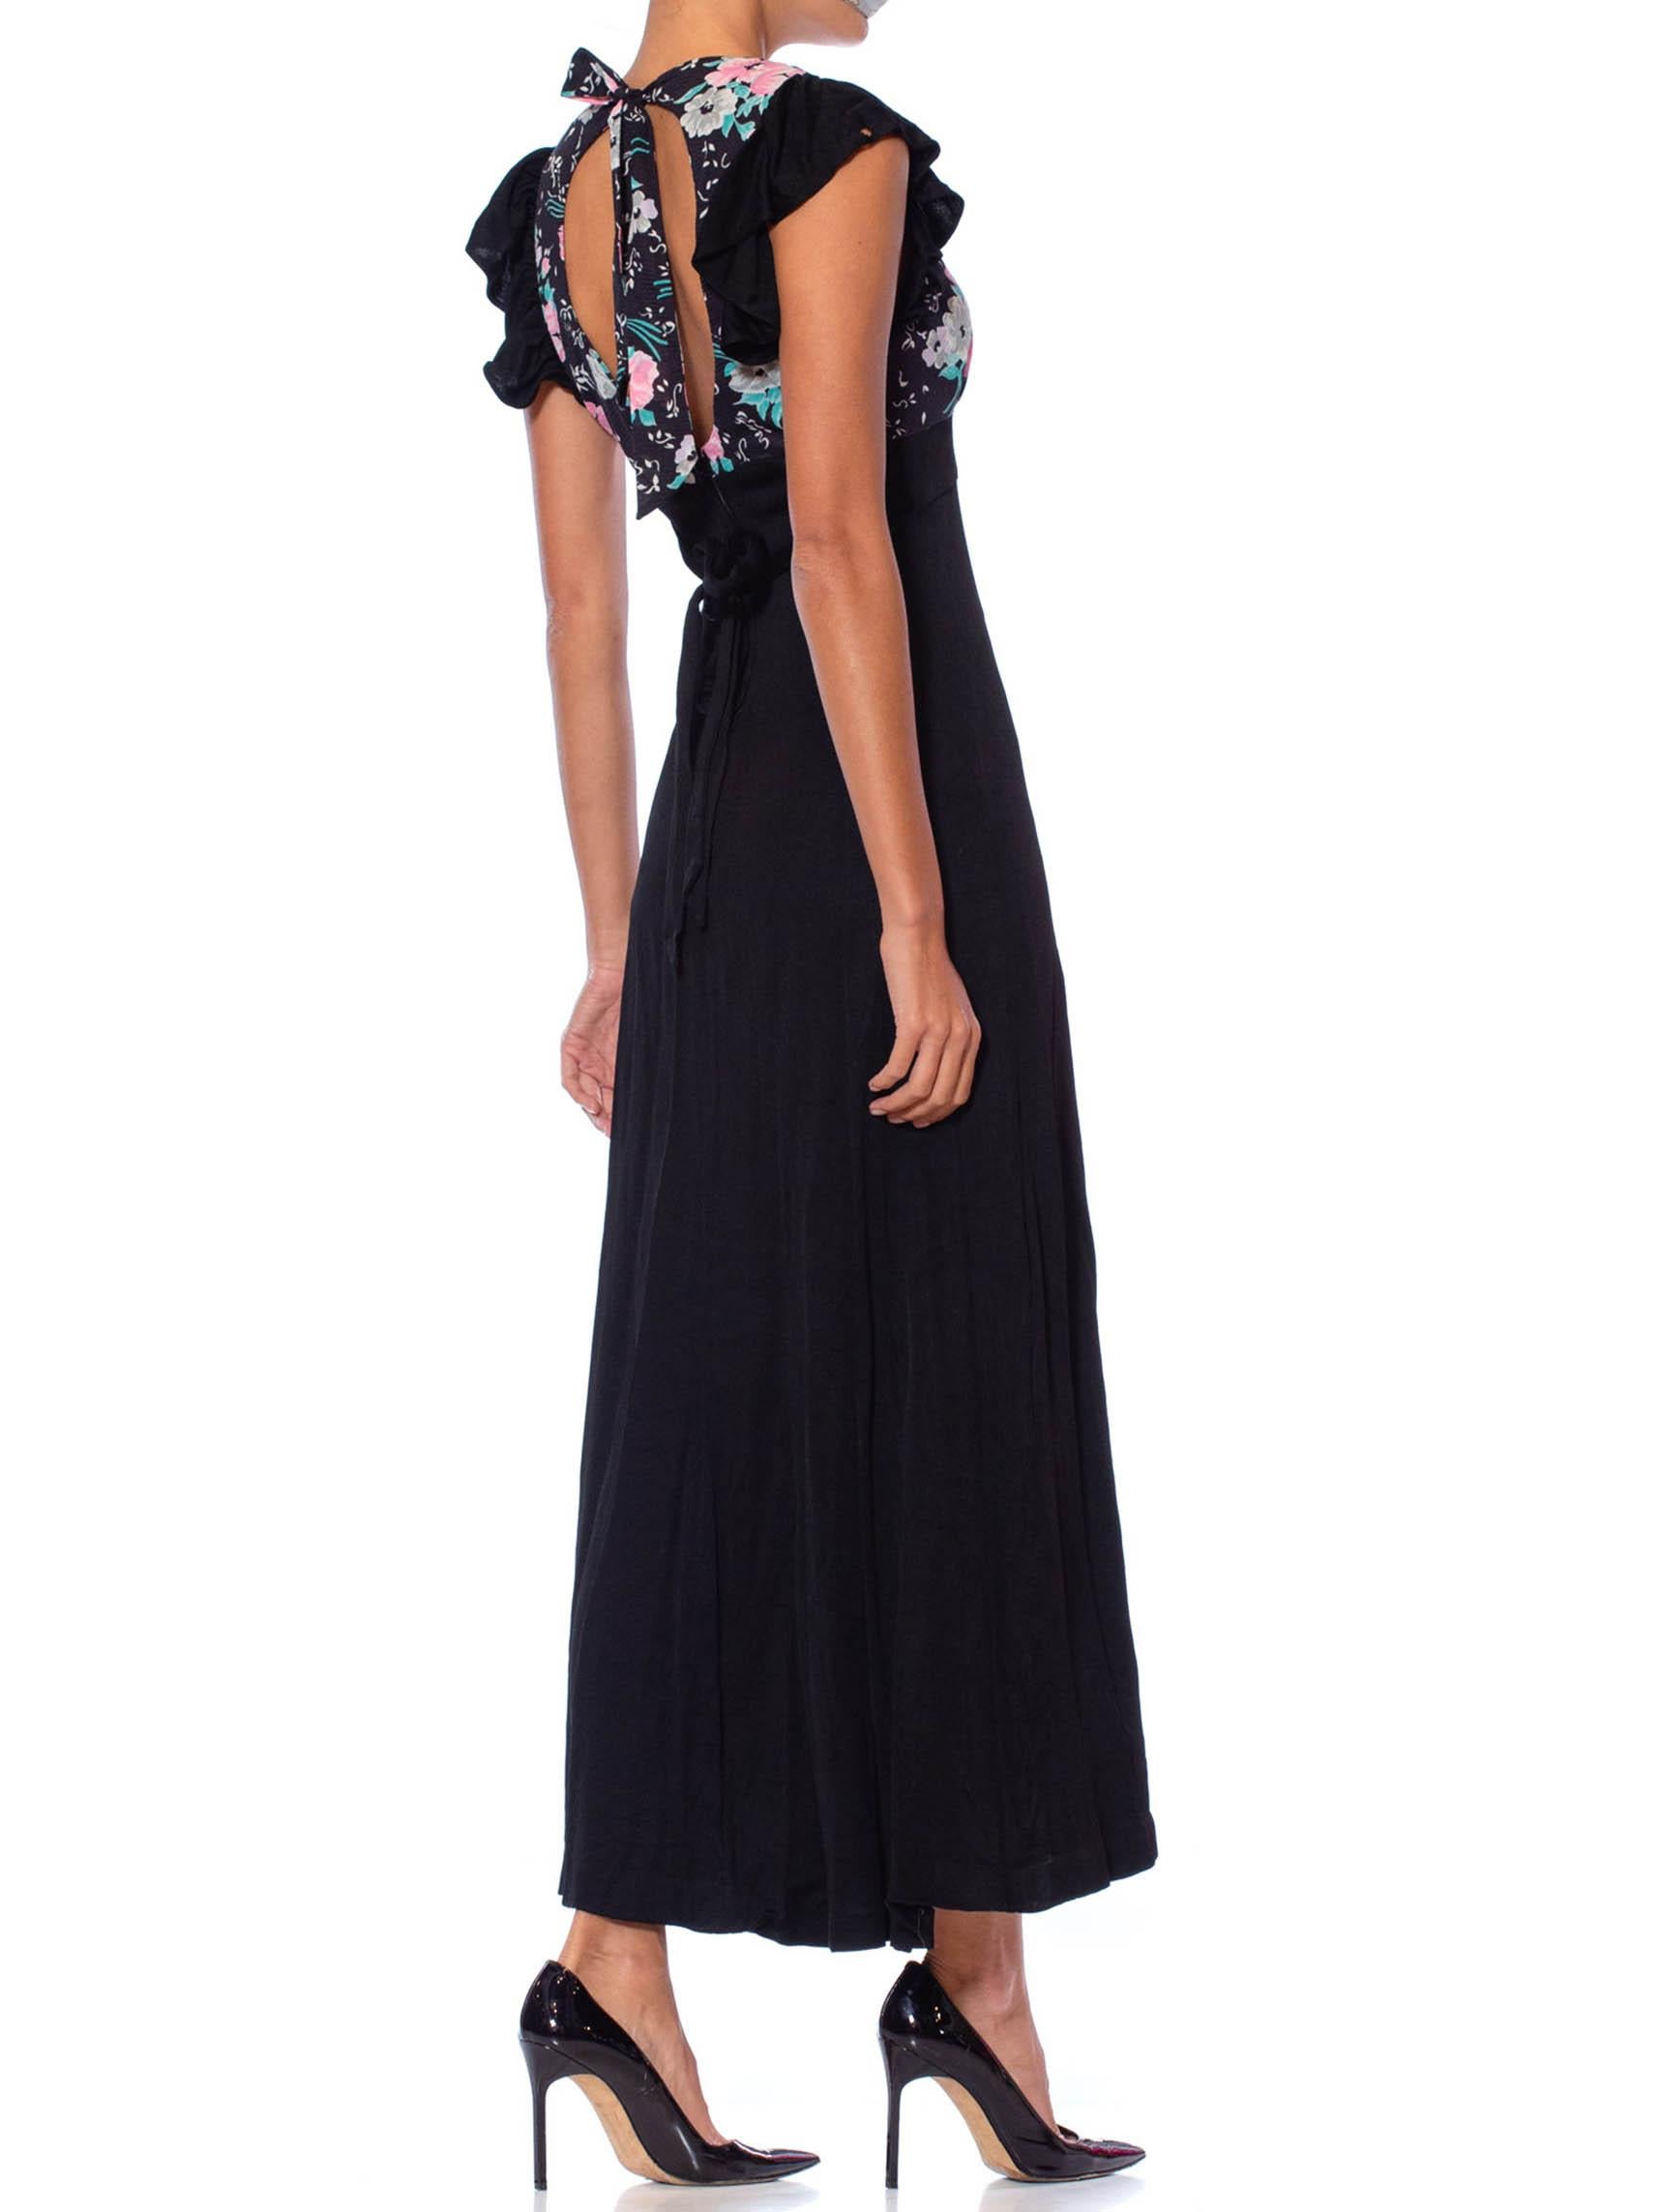 Women's 1970S Black & Floral Poly Blend Jersey Ruffled Maxi Dress With Tie Belt For Sale